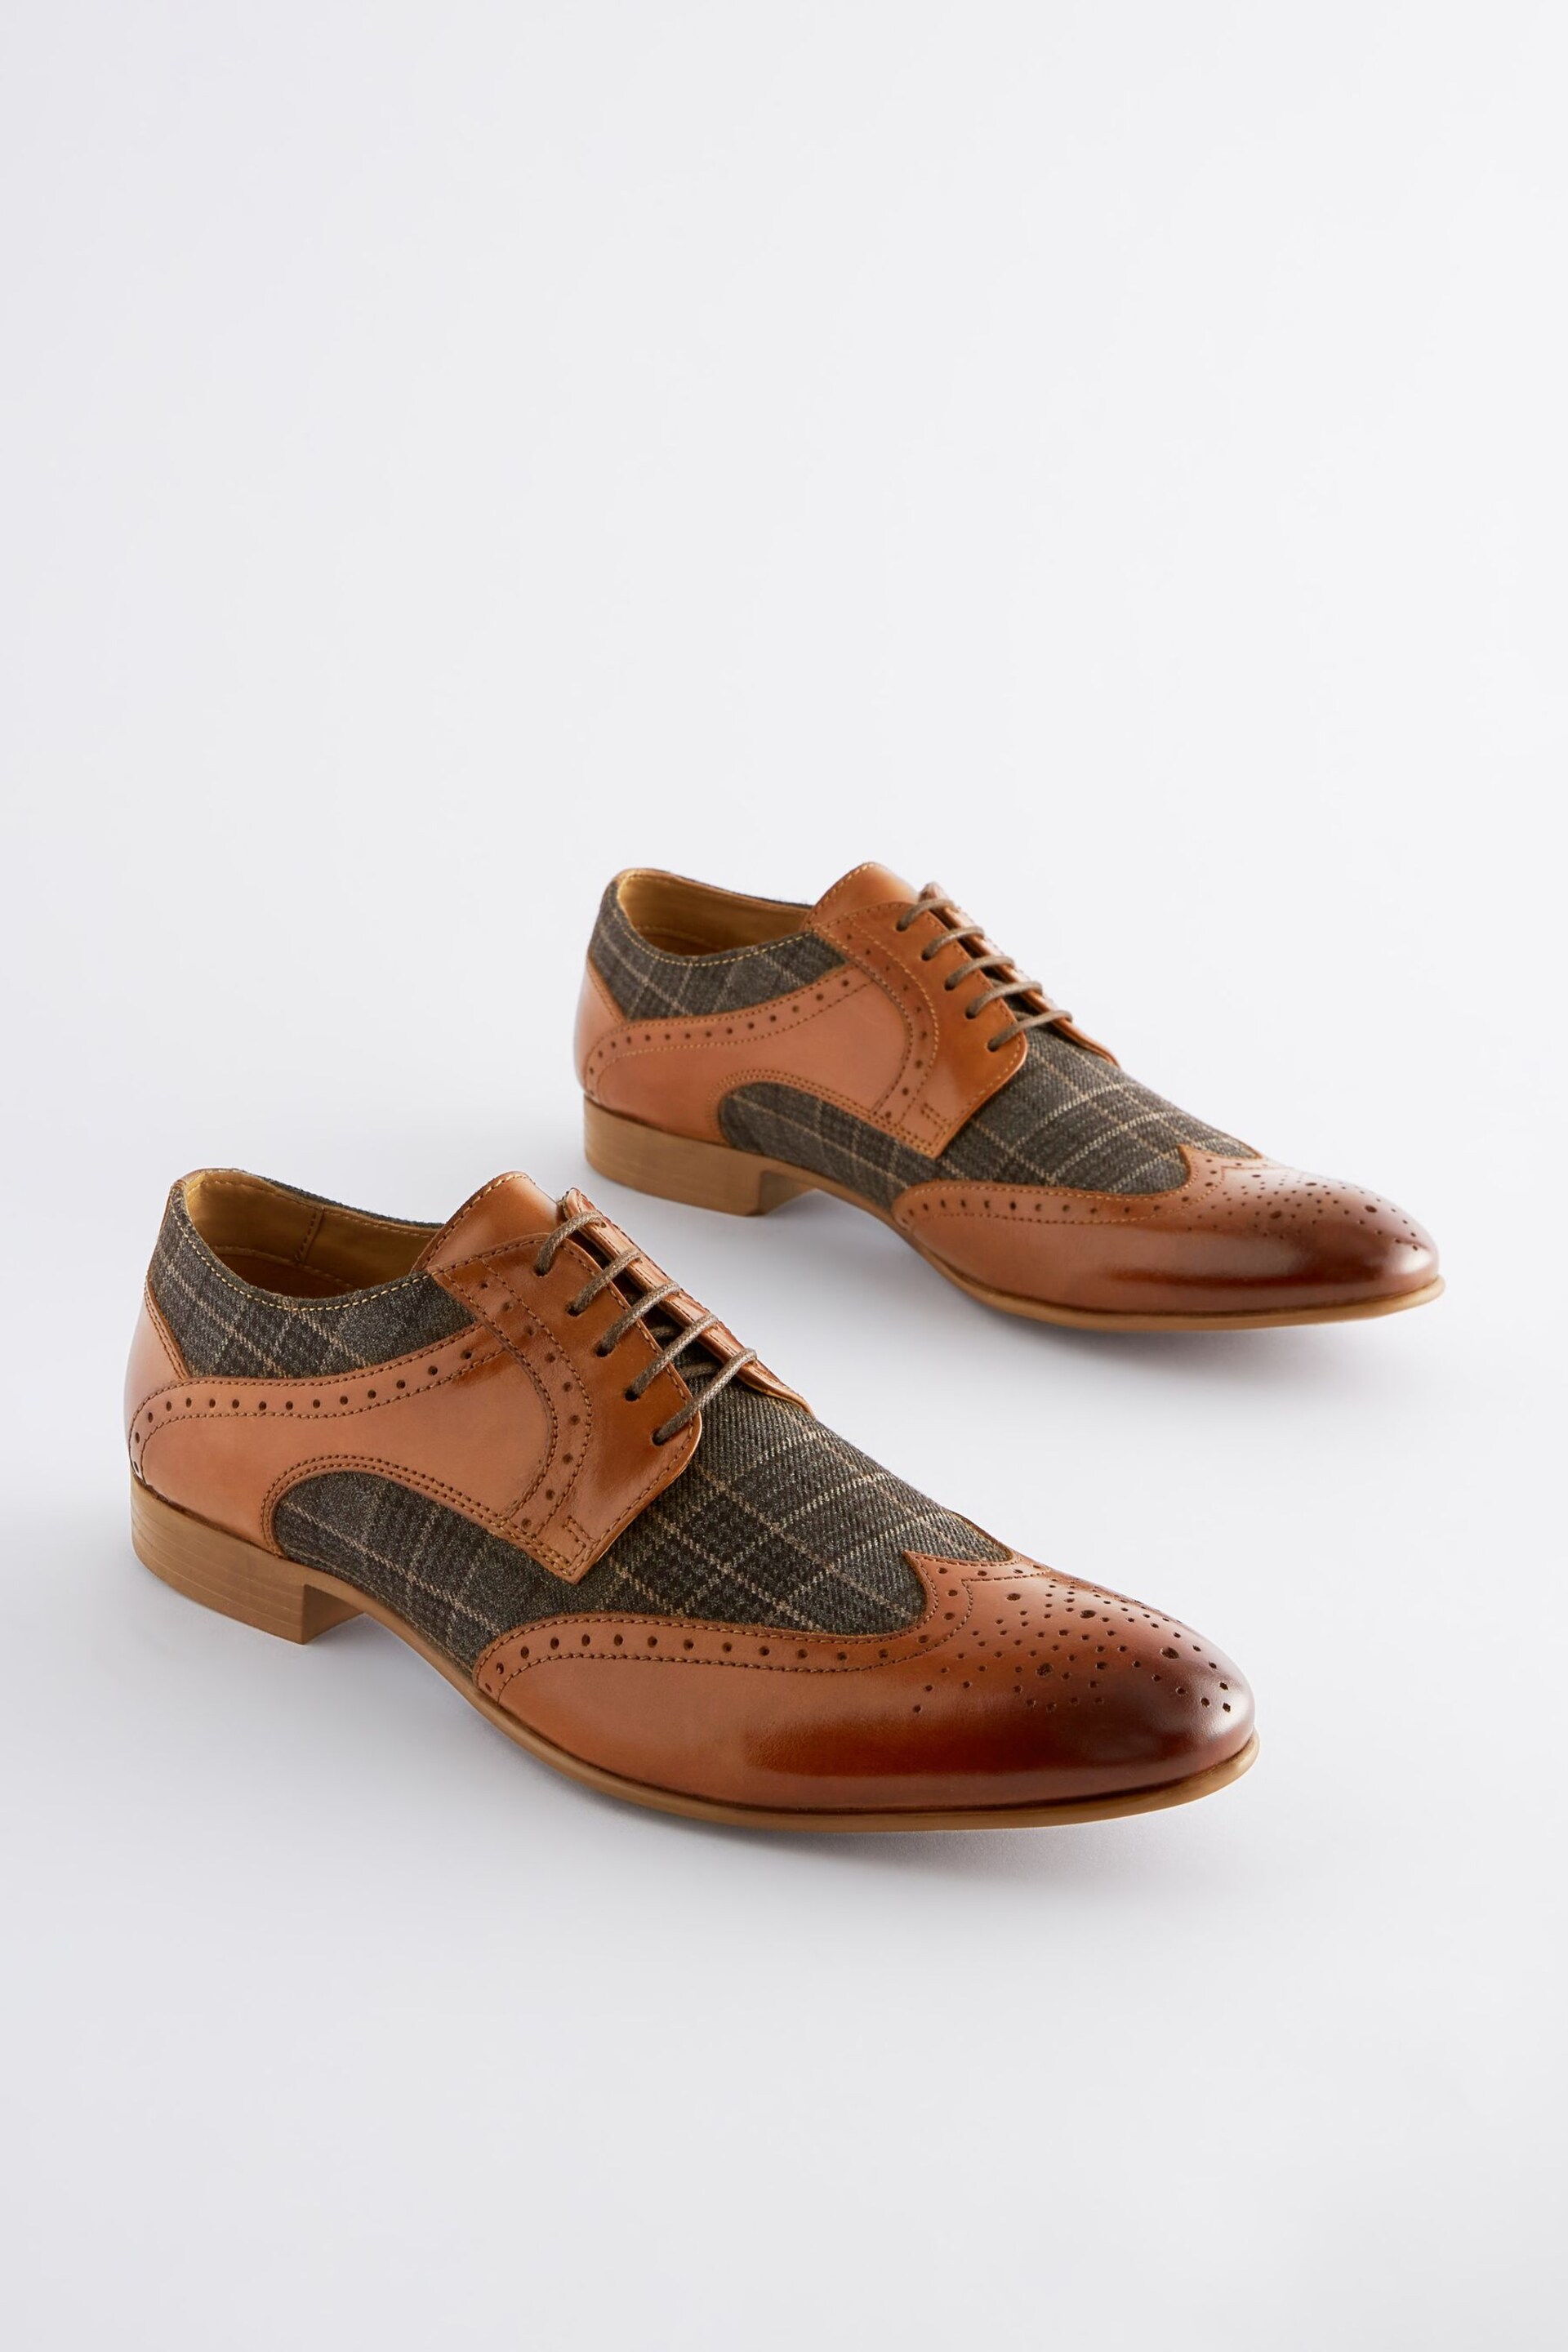 Tan Brown Leather & Check Brogue Shoes - Image 2 of 7